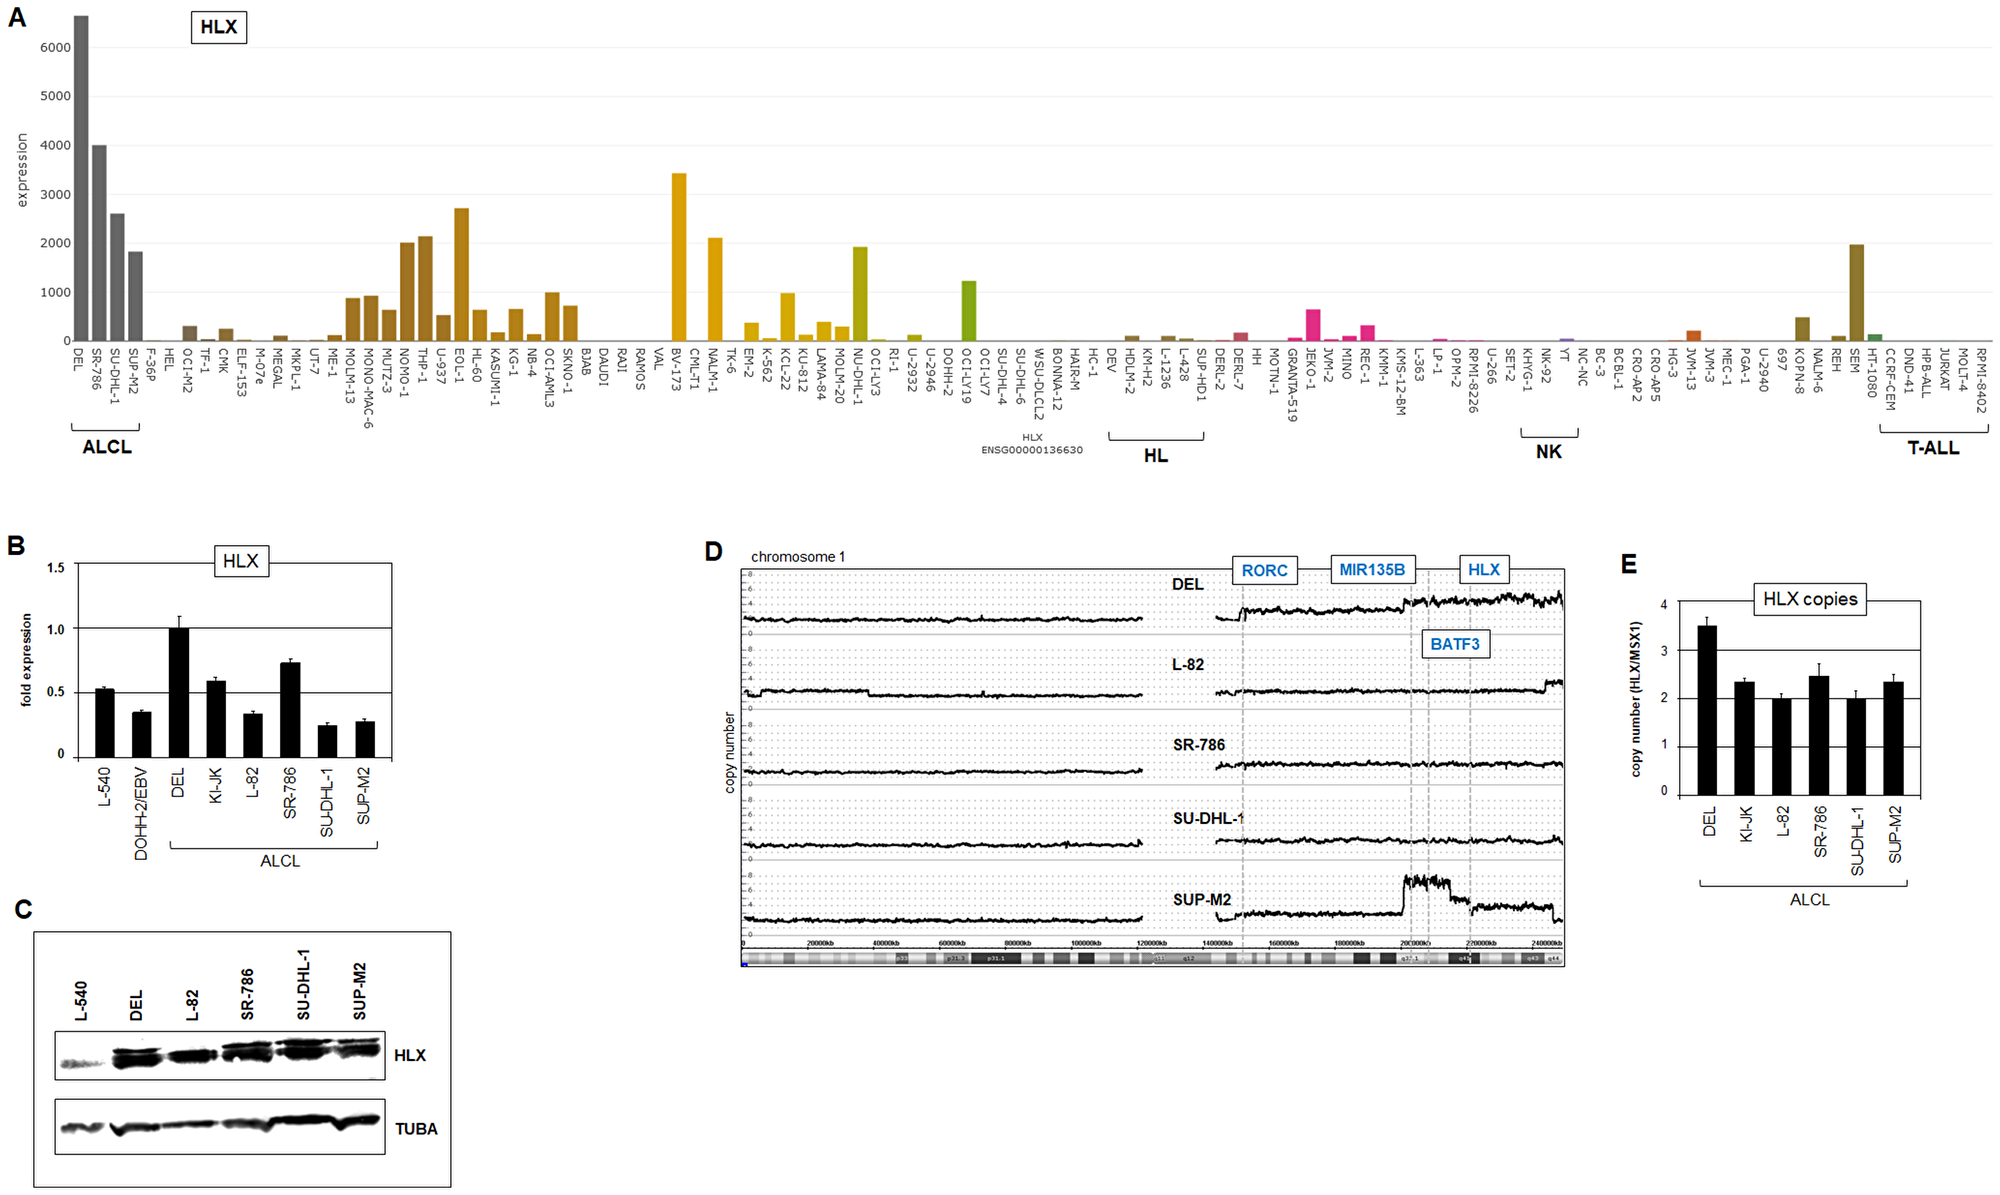 Expression and genomic aberrations of HLX.